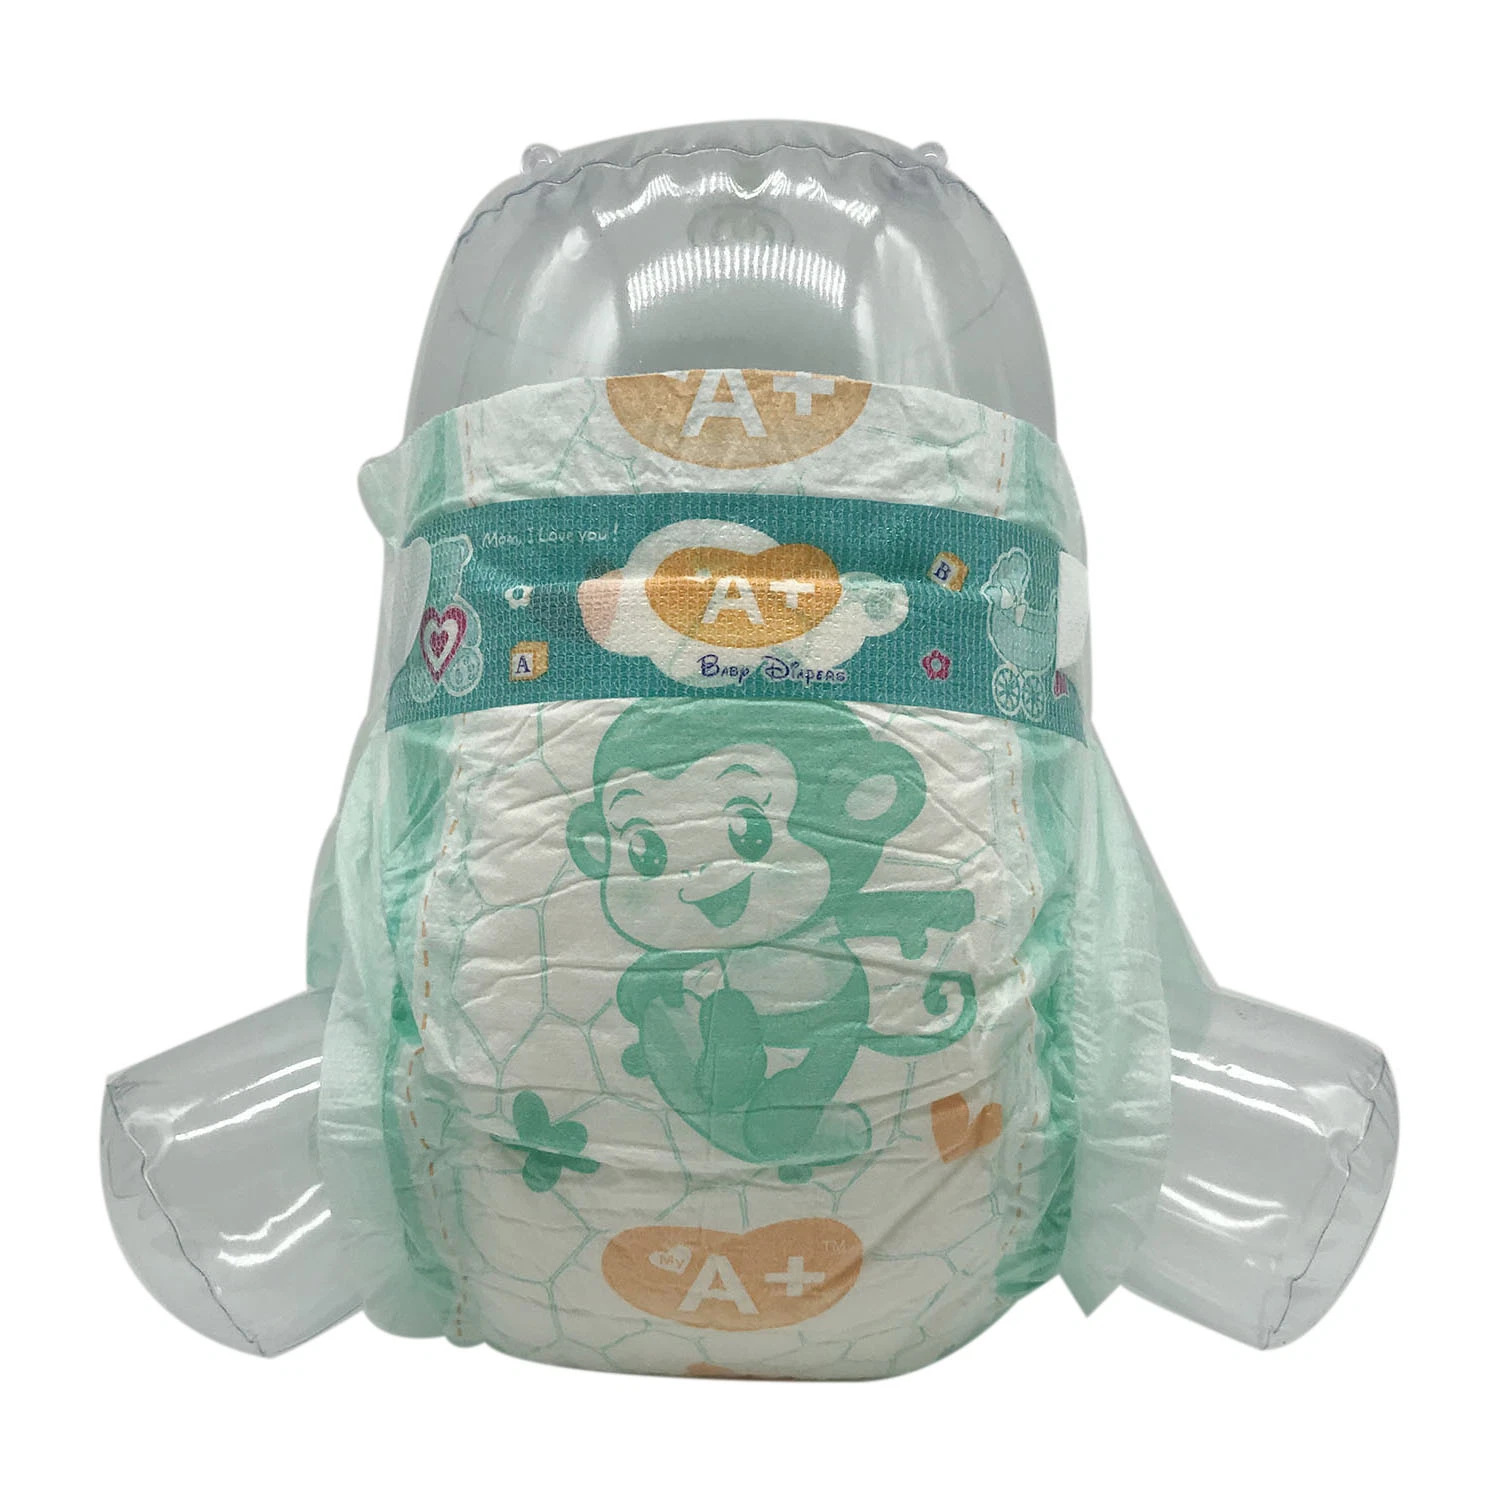 China Products/Suppliers Premium Quality Baby Care Baby Diaper Soft and Breathable High Absorption Baby Diapers